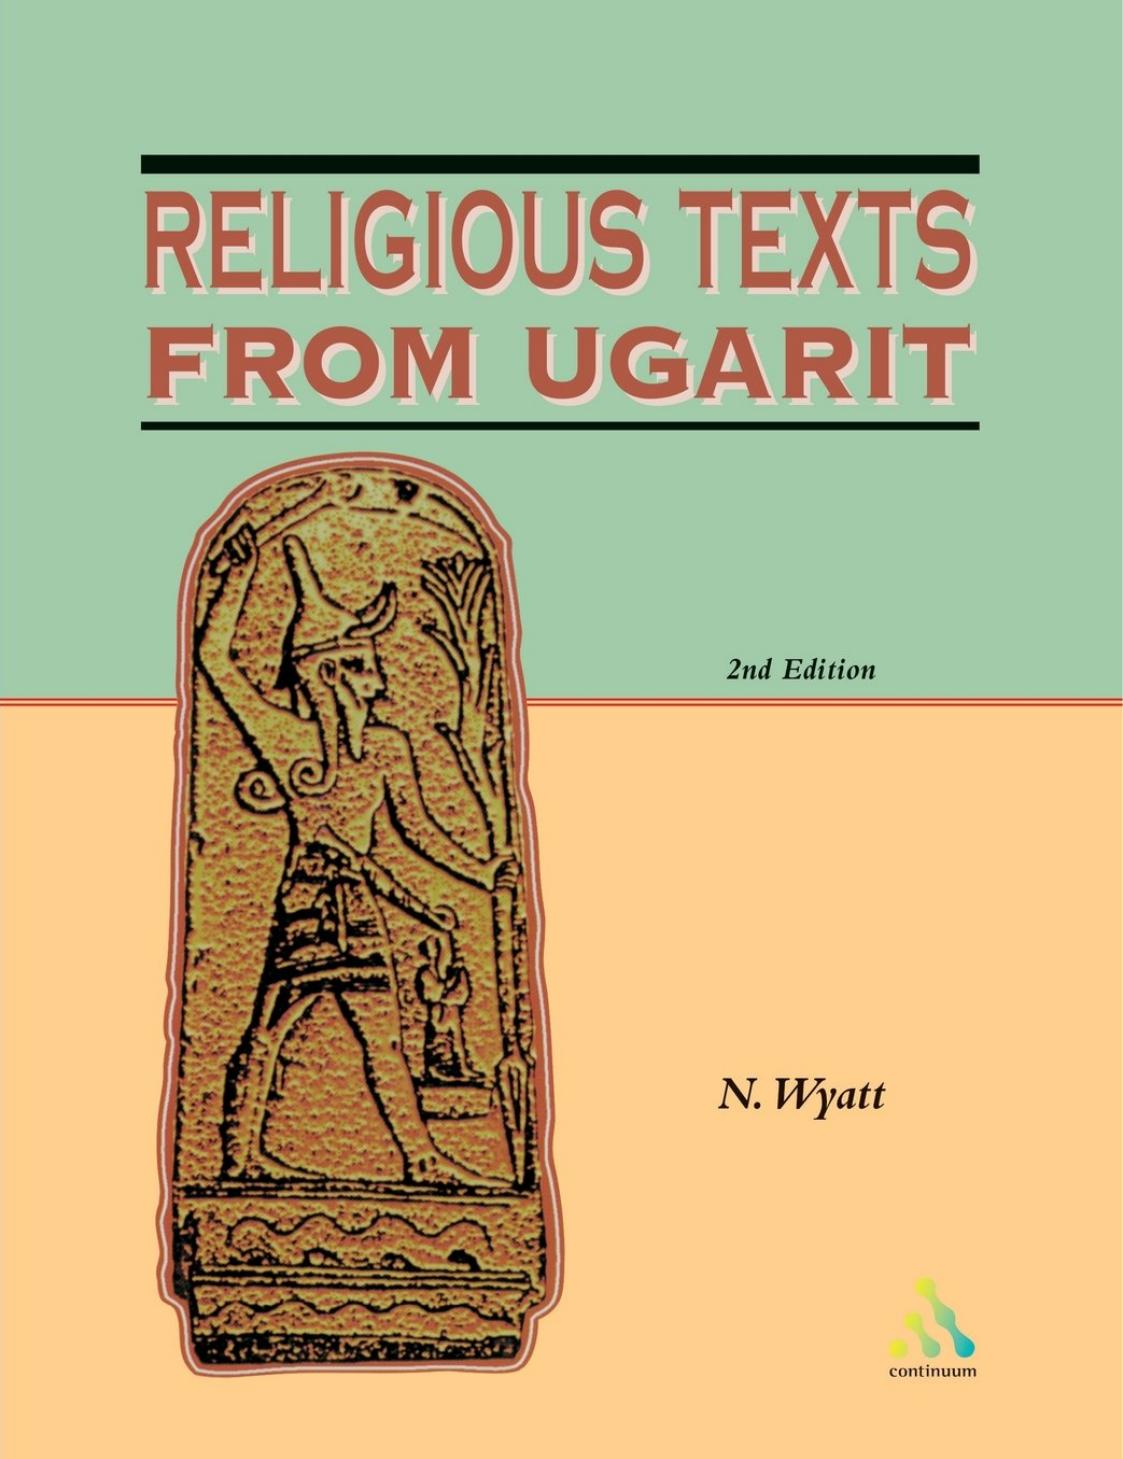 Religious Texts from Ugarit 2nd Edition 2002